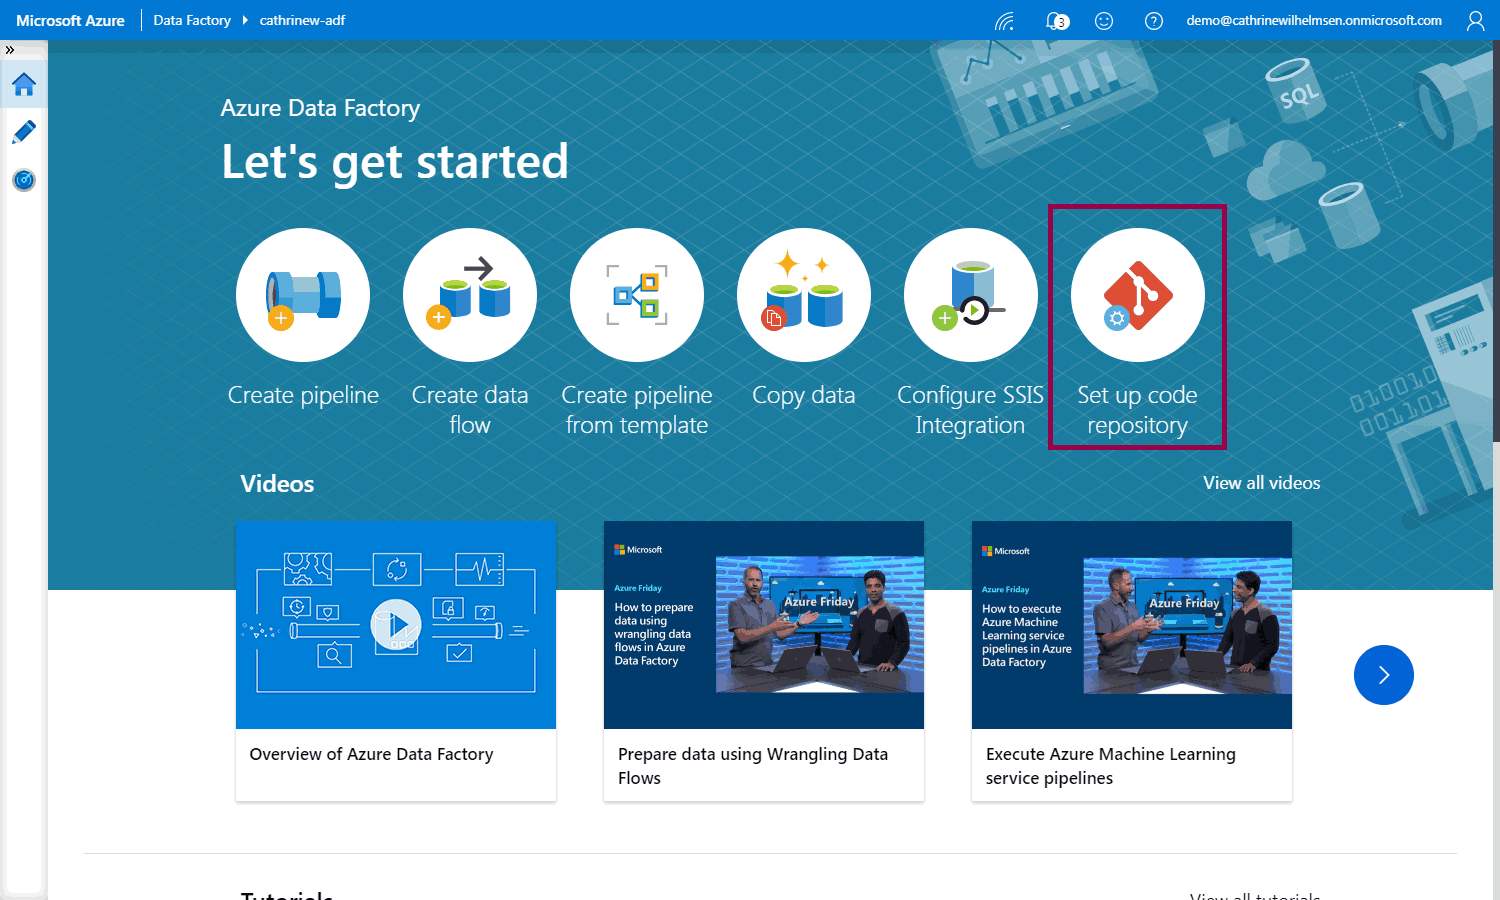 Screenshot of the Azure Data Factory home page, highlighting the set up code repository button